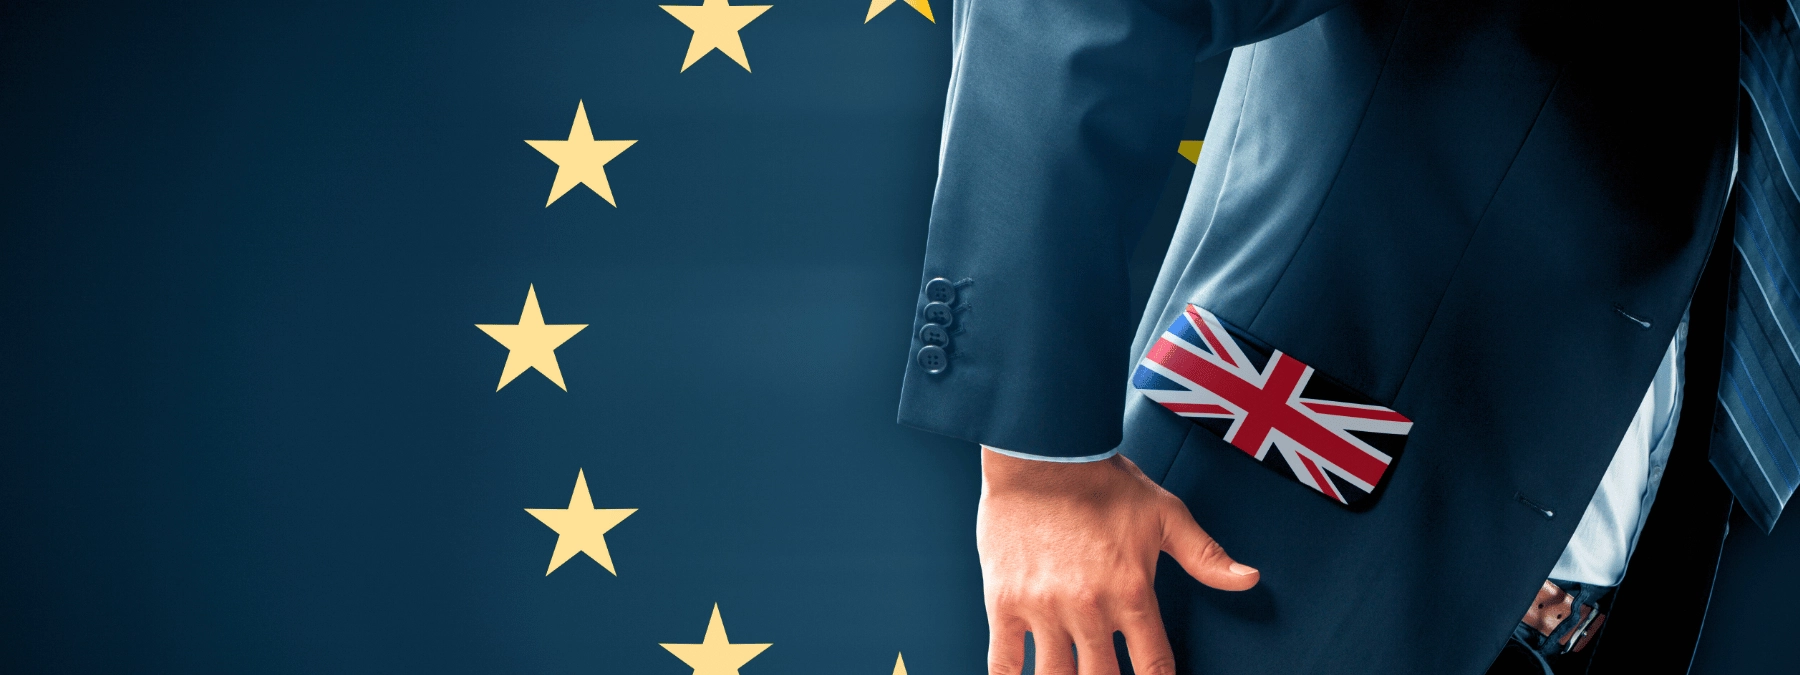 Study claims SMEs may be worst affected by Brexit